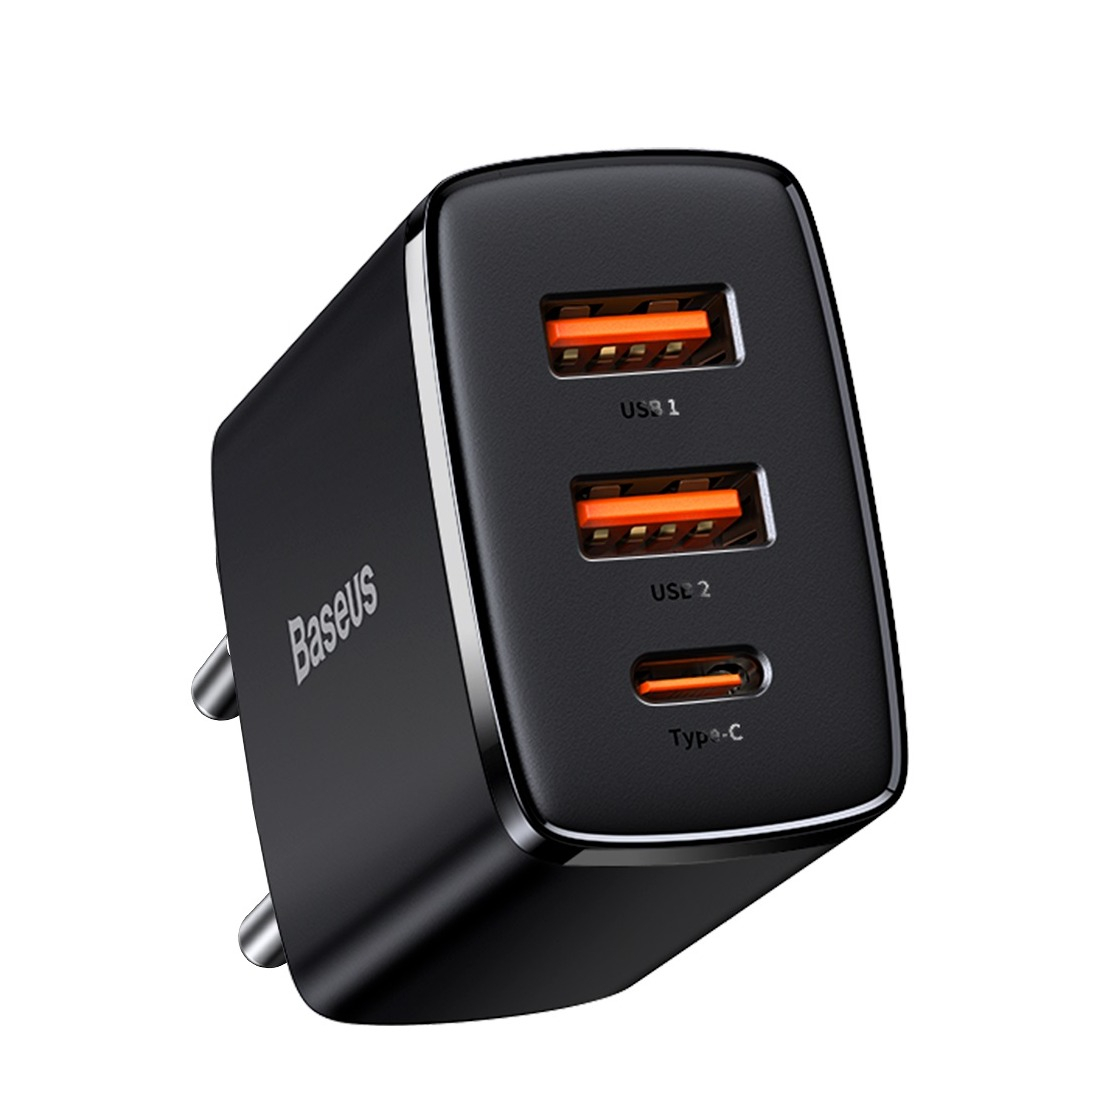 Image of Baseus - (30W) Dual USB / USB C Quick Charge QC 3.0 Ladegerät mit Power Delivery 3.0 - Schwarz bei Apfelkiste.ch